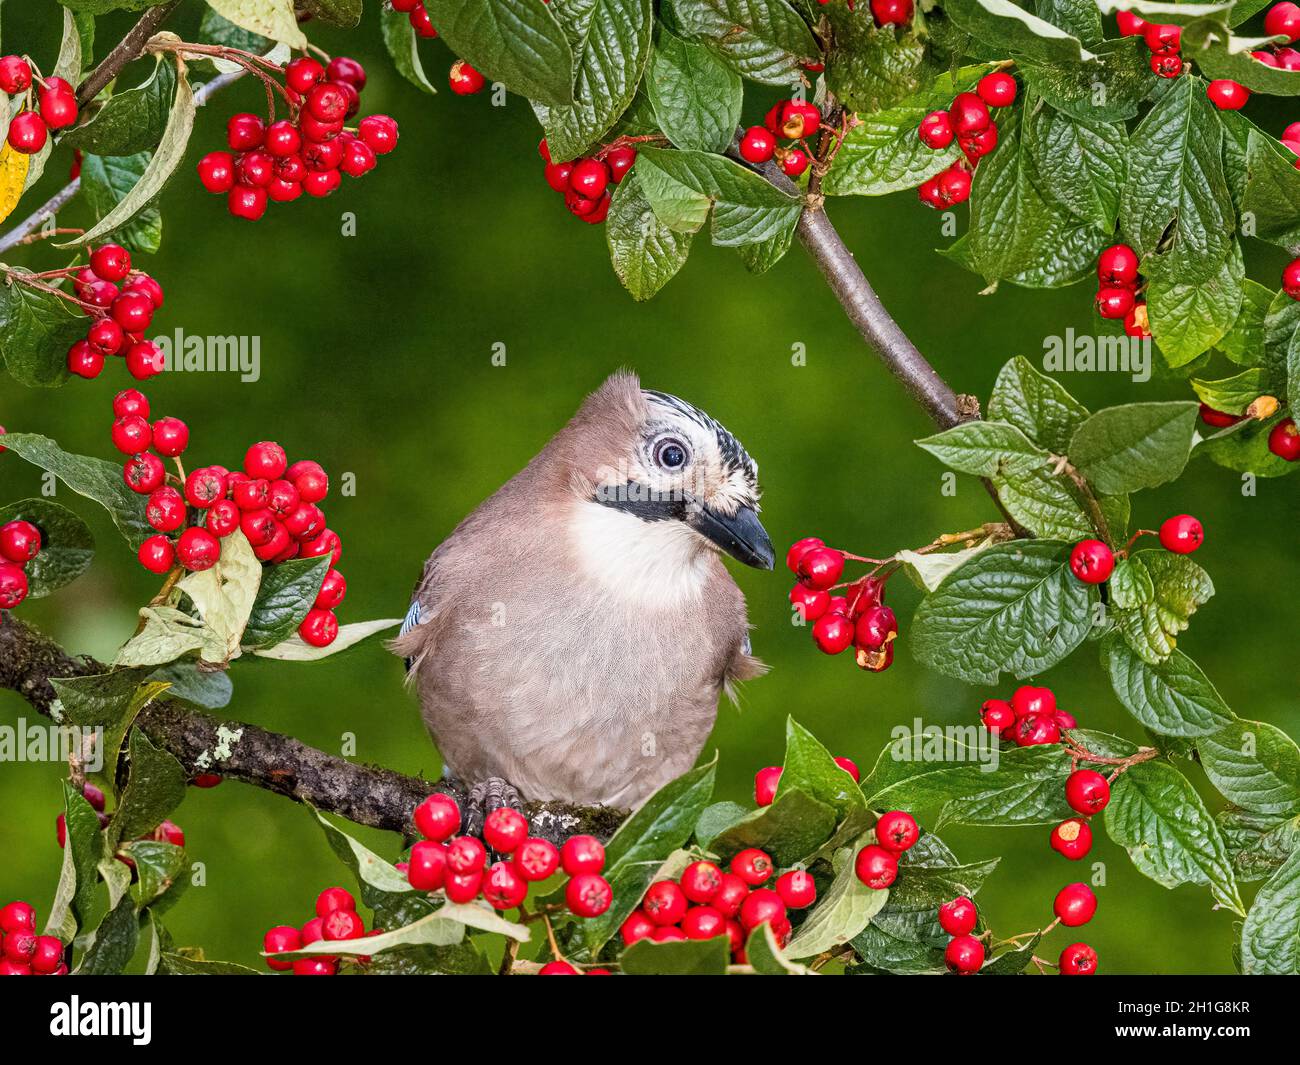 Aberystwyth, Ceredigion, Wales, UK. 18th Oct, 2021. A eurasian jay (Garrulus glandarius) is foraging for food in a cotoneaster tree laden with red berries.Credit: Phil Jones/Alamy Live News Stock Photo